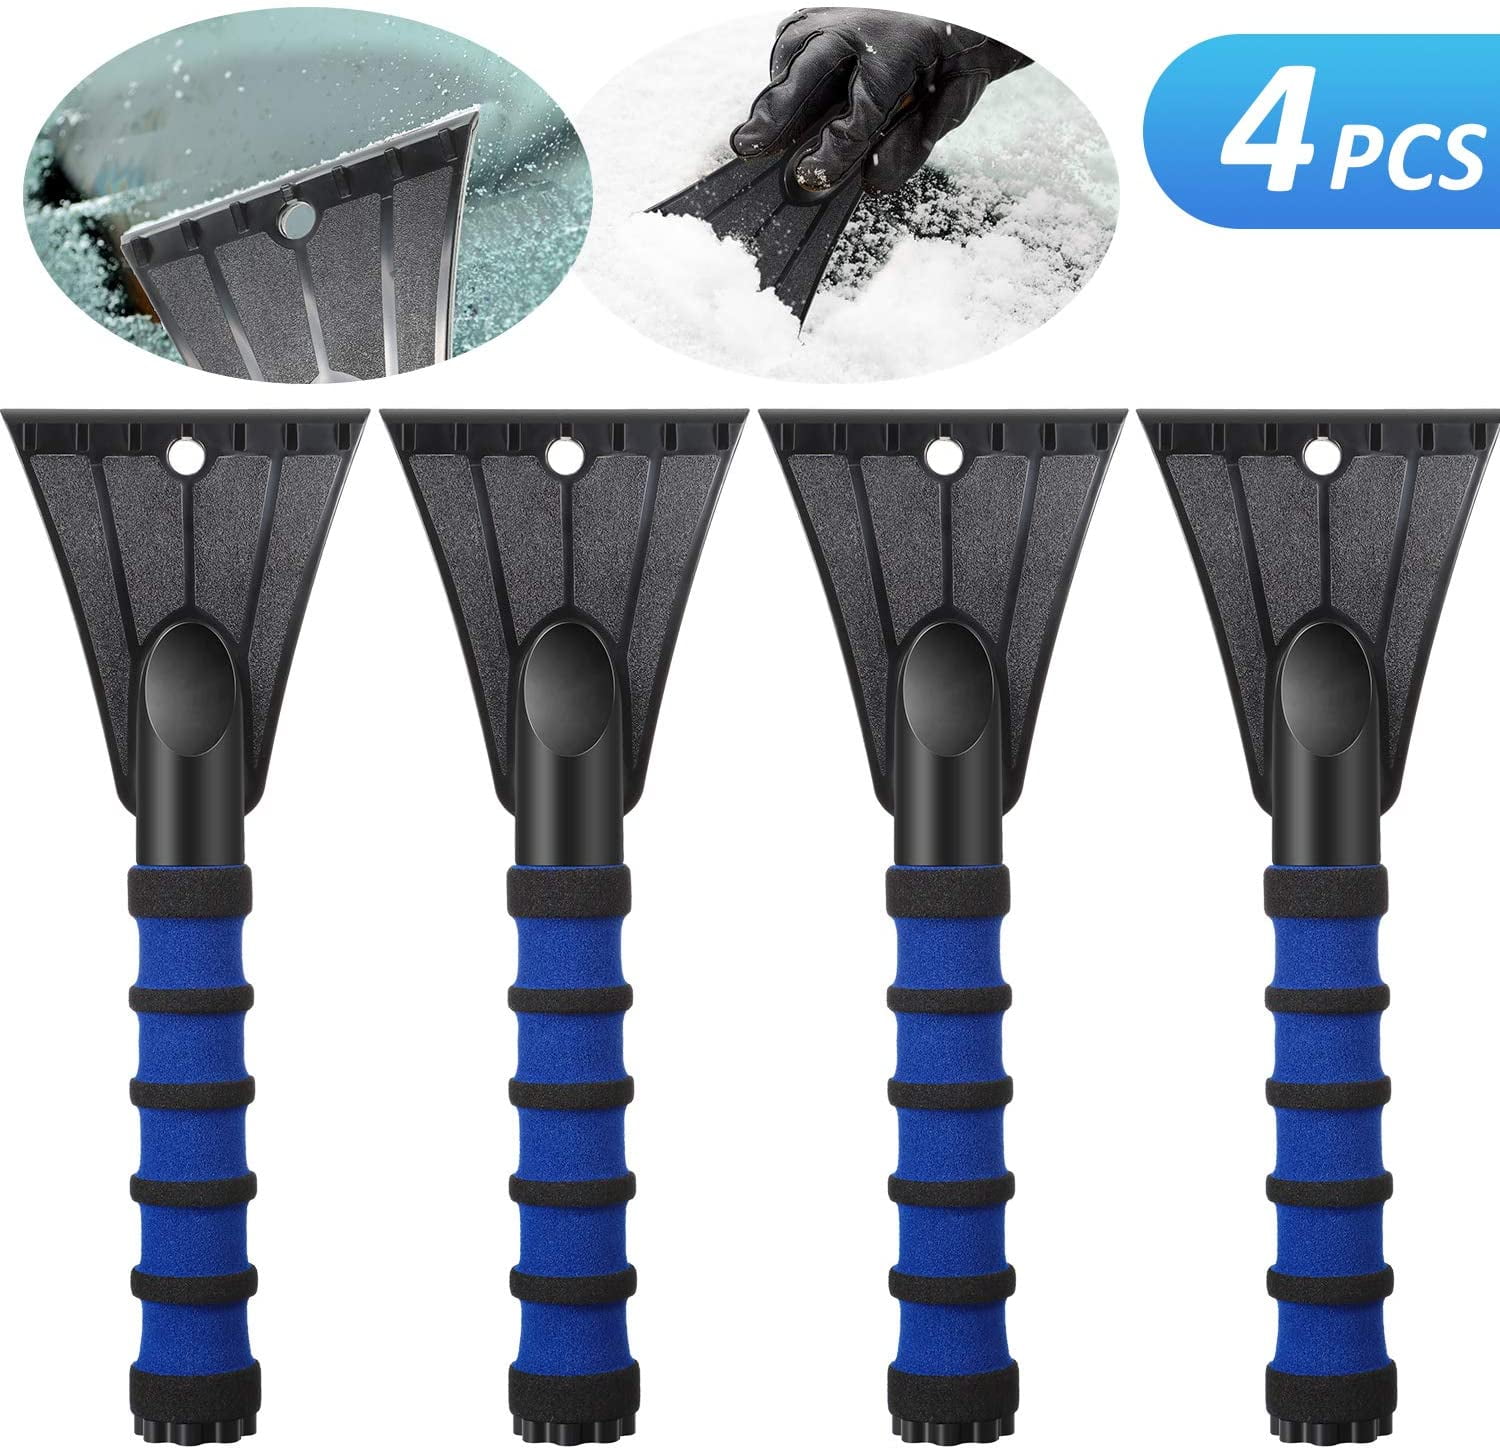 Mudder 4 Pieces Ice Scraper Ice Snow Scraper Frost and Snow Scraper Removal Tool for Car Windshield Window Frost Scraping Snow 